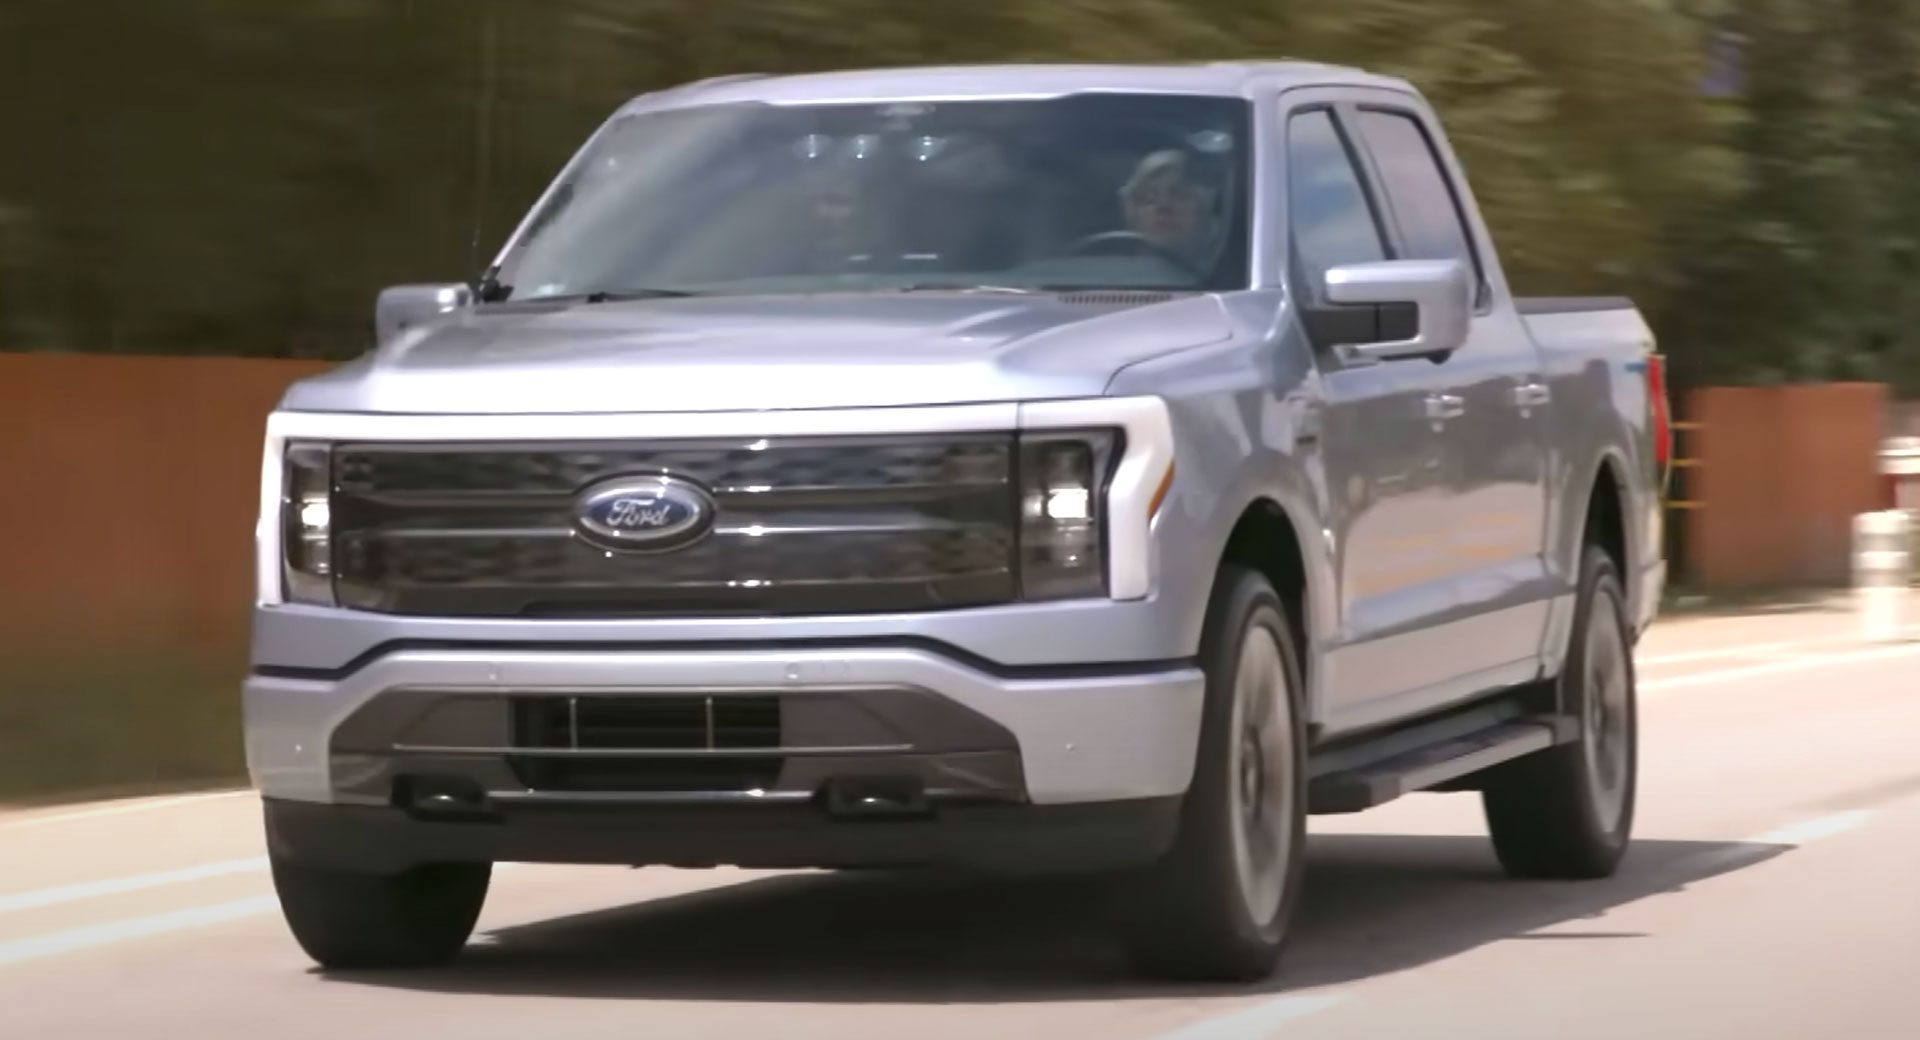 Jay Leno Experiences The F-150 Lightning With Ford CEO Jim Farley Auto Recent